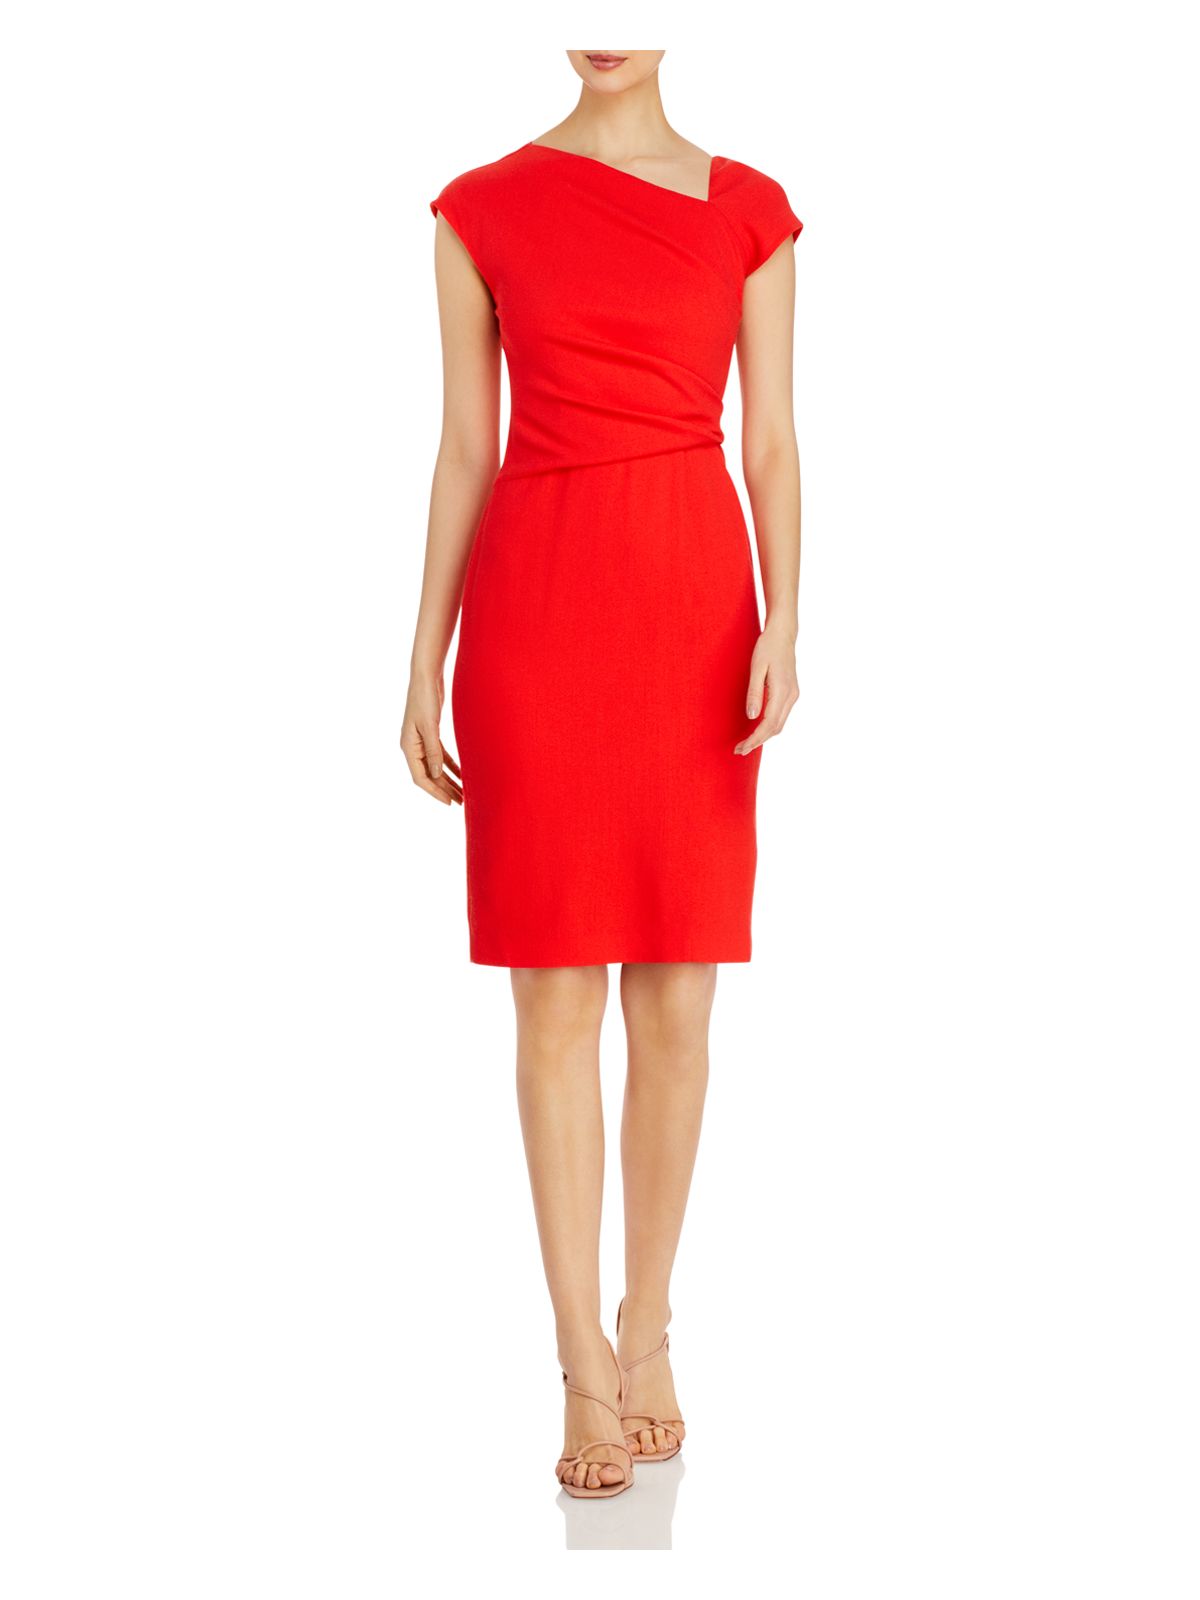 NARCISO RODRIGUEZ Womens Orange Textured Zippered Ruched Lined Cap Sleeve Asymmetrical Neckline Above The Knee Evening Sheath Dress 38